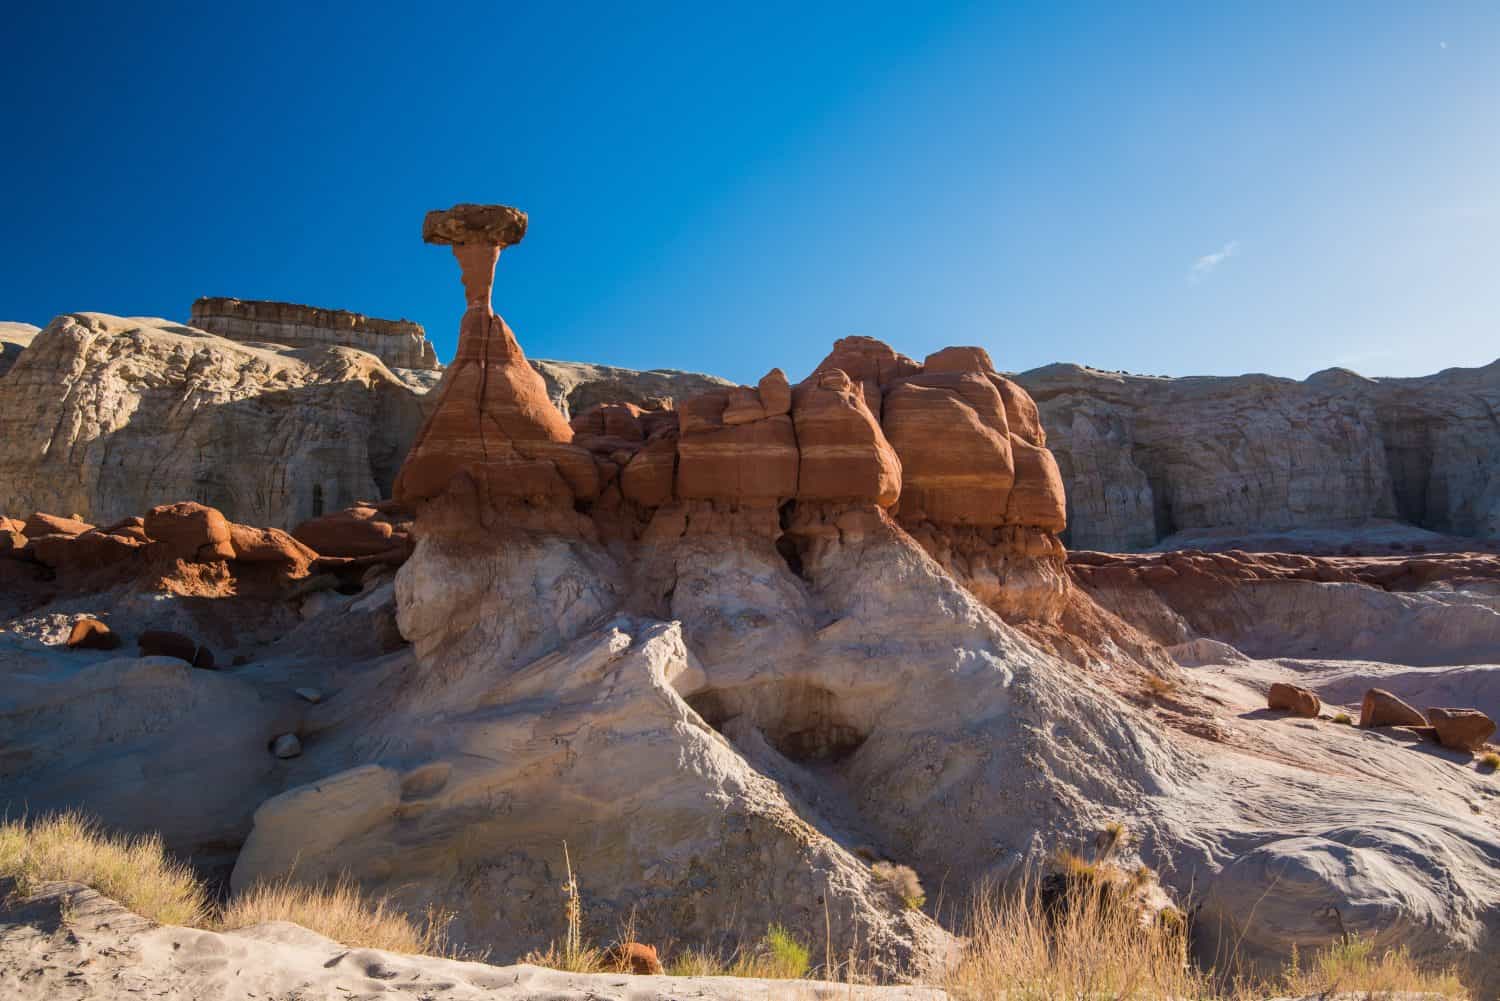 Toadstool rock formations near Kanab, UT. USA. These geologic wonders are caused by erosion of soft sandstone underneath the harder stone on top, giving the impression of a 'toadstool'.